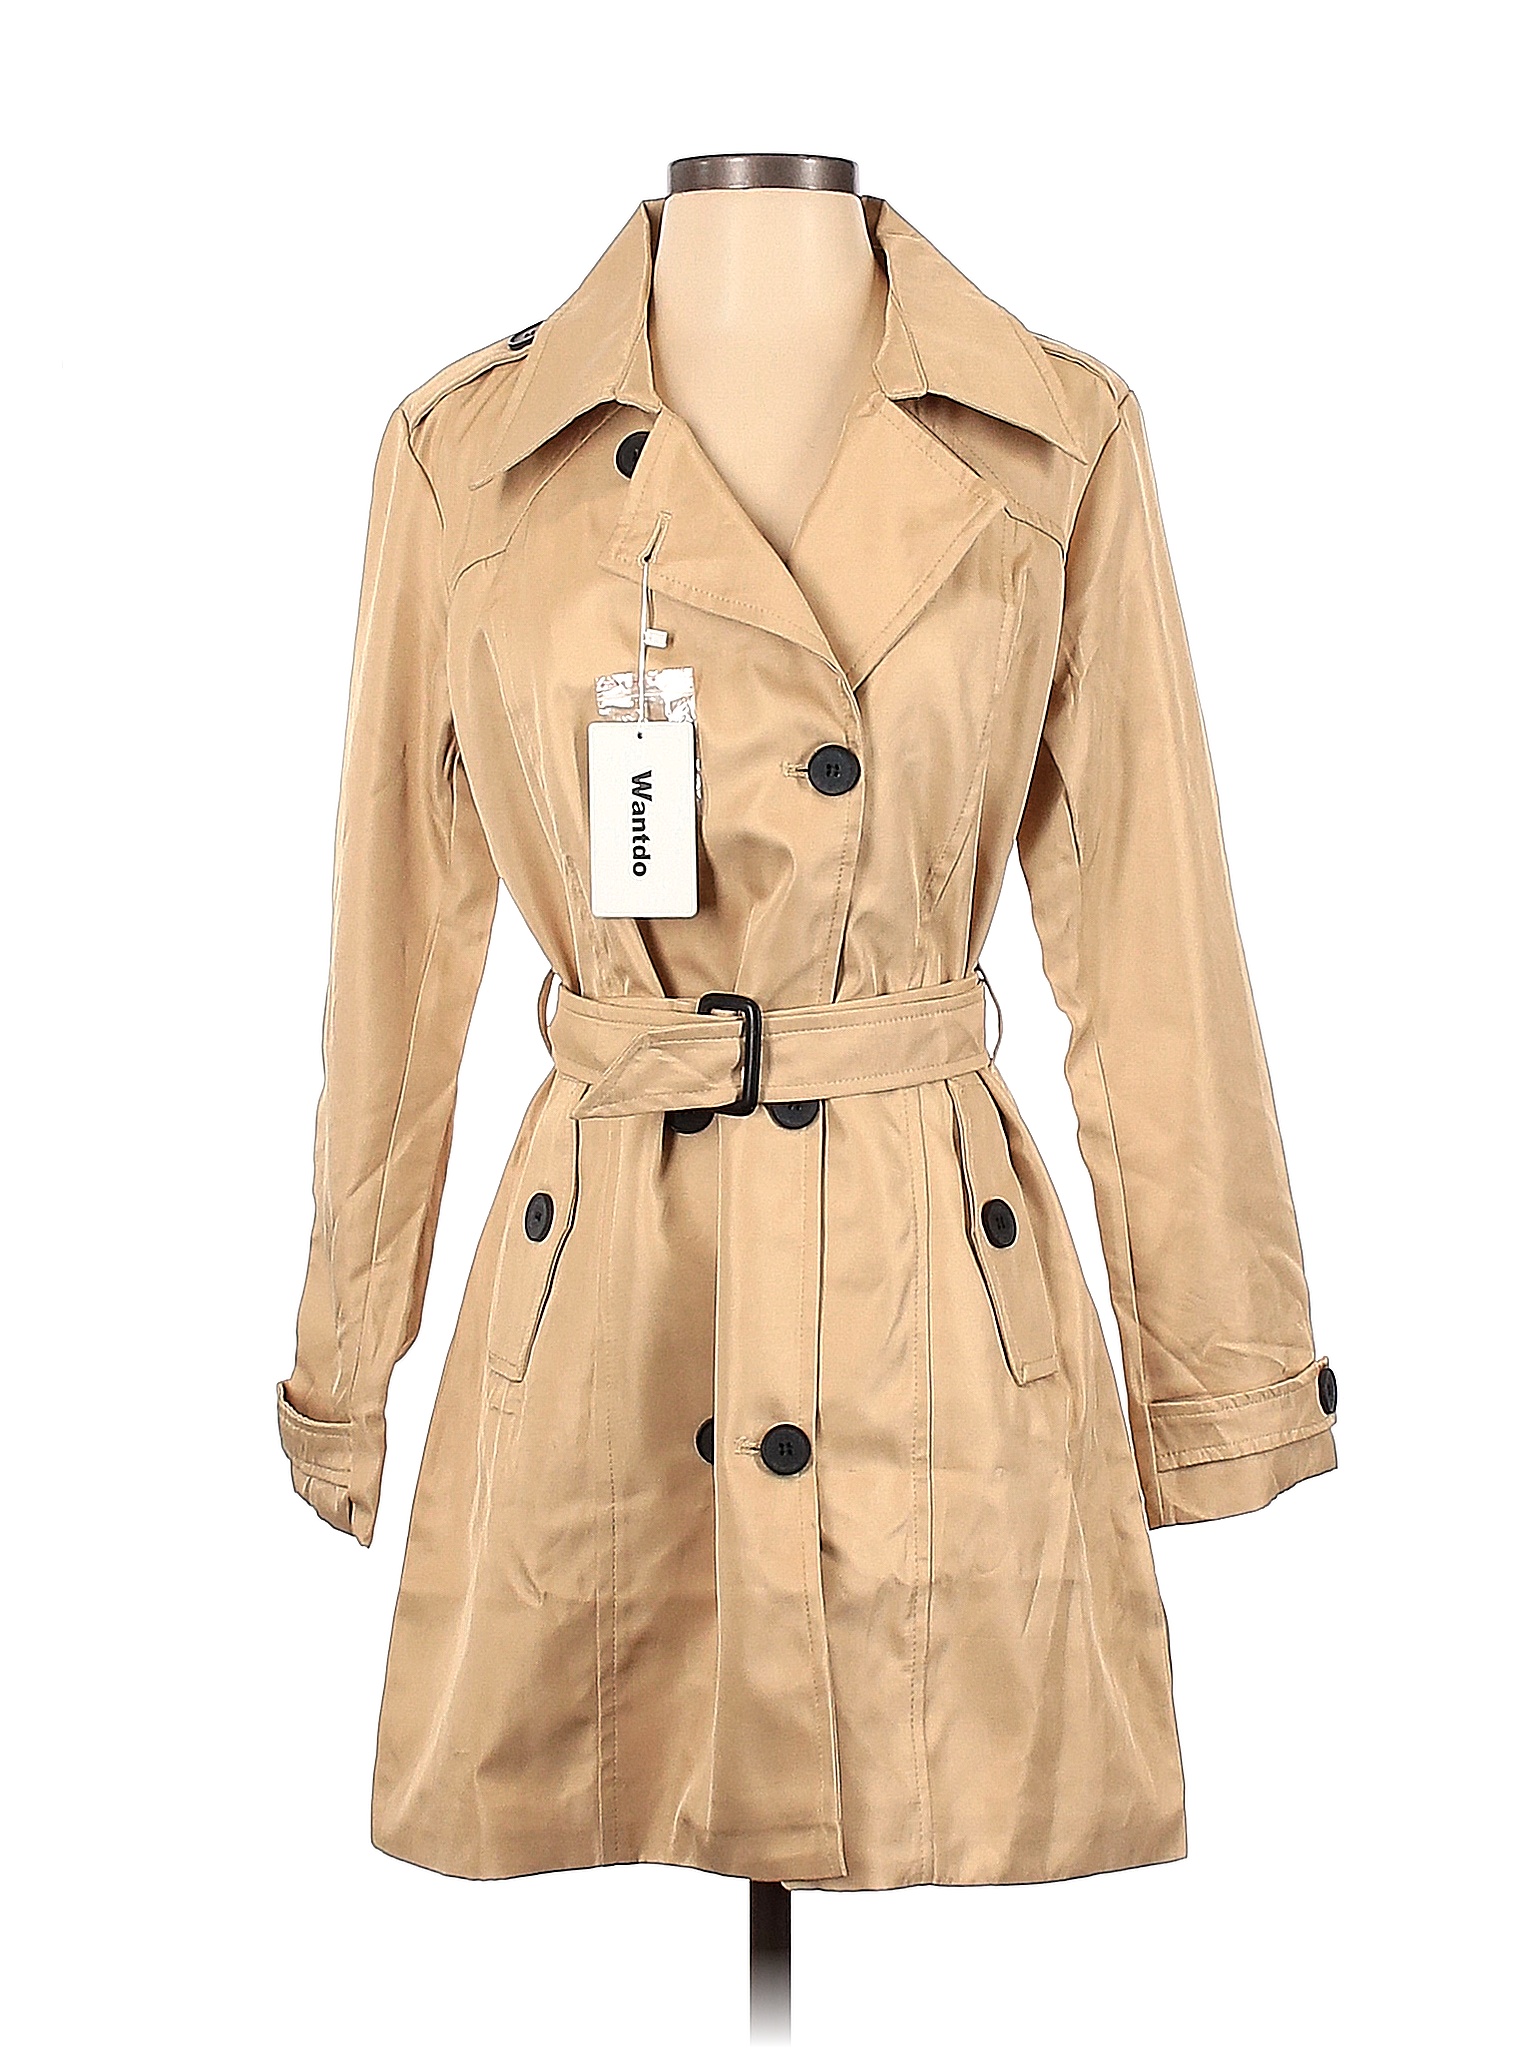 Wantdo 100% Polyester Solid Colored Tan Trenchcoat Size S - 72% off ...